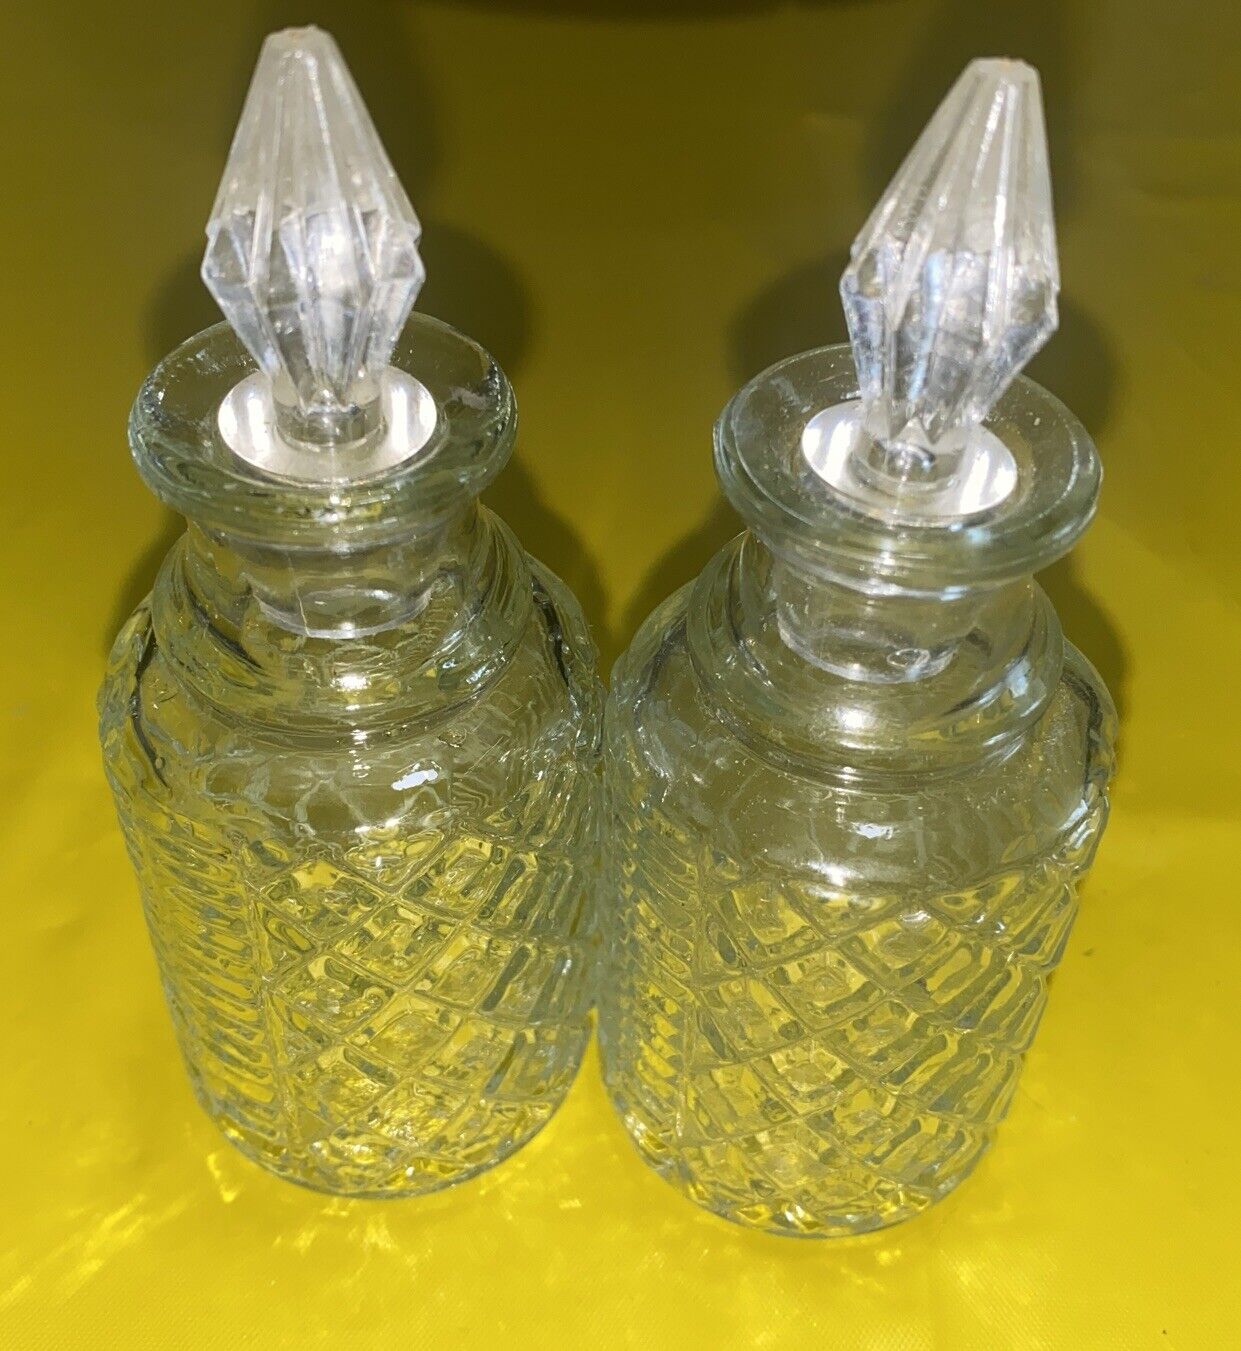 SMALL VINTAGE PRESSED CLEAR GLASS PERFUME BOTTLE W/PLASTIC STOPPER SET OF 2